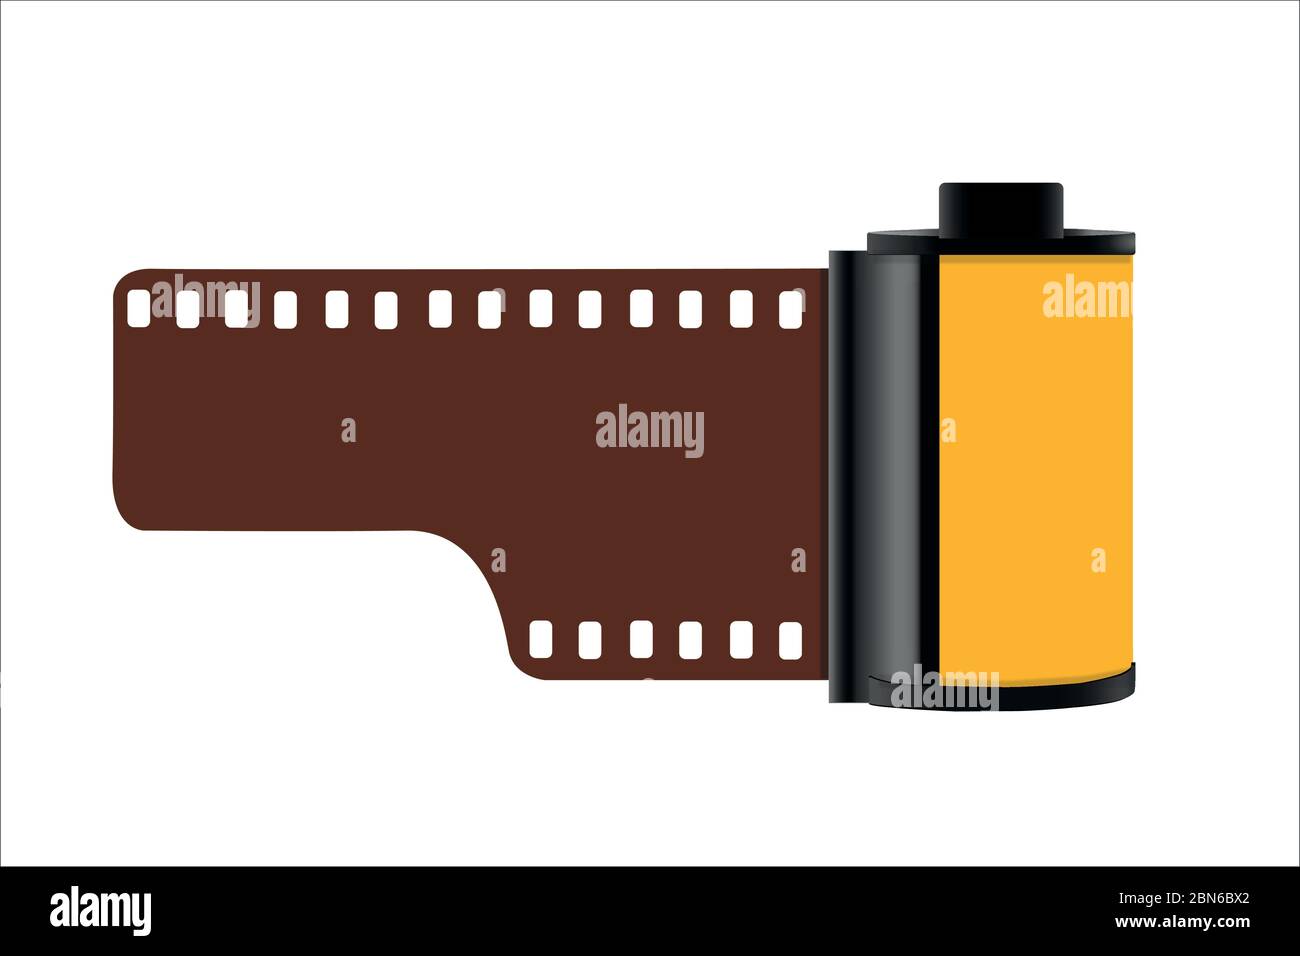 Negative film 135. Classic analog photography. 35mm film format. Developing negatives. Film roll cassette.  Process C-41. Stock Vector